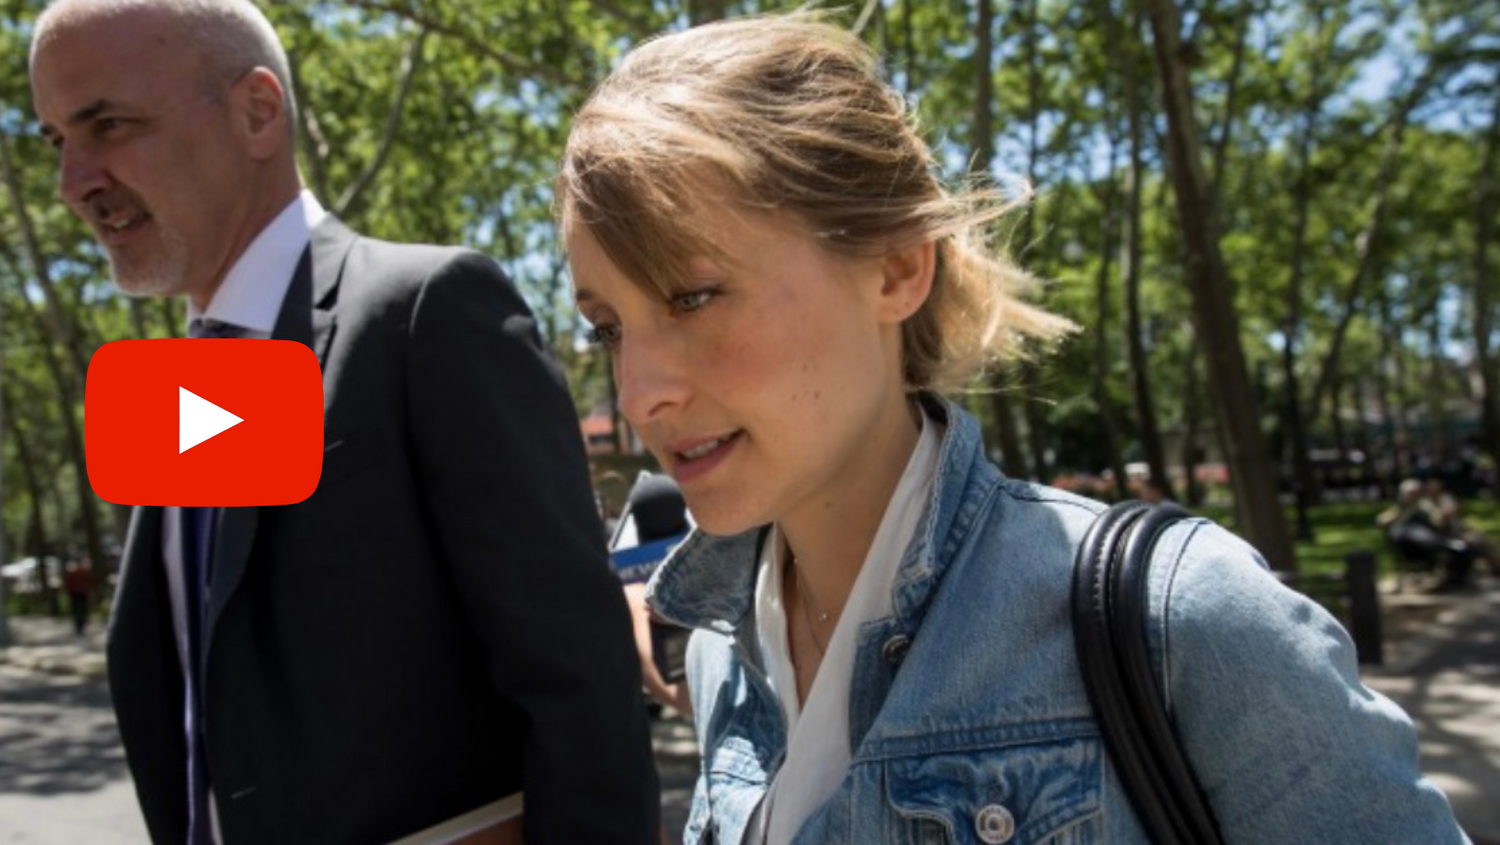 Smallville Actor Allison Mack Released From Prison After Serving Two Years In Nxivm Cult Case